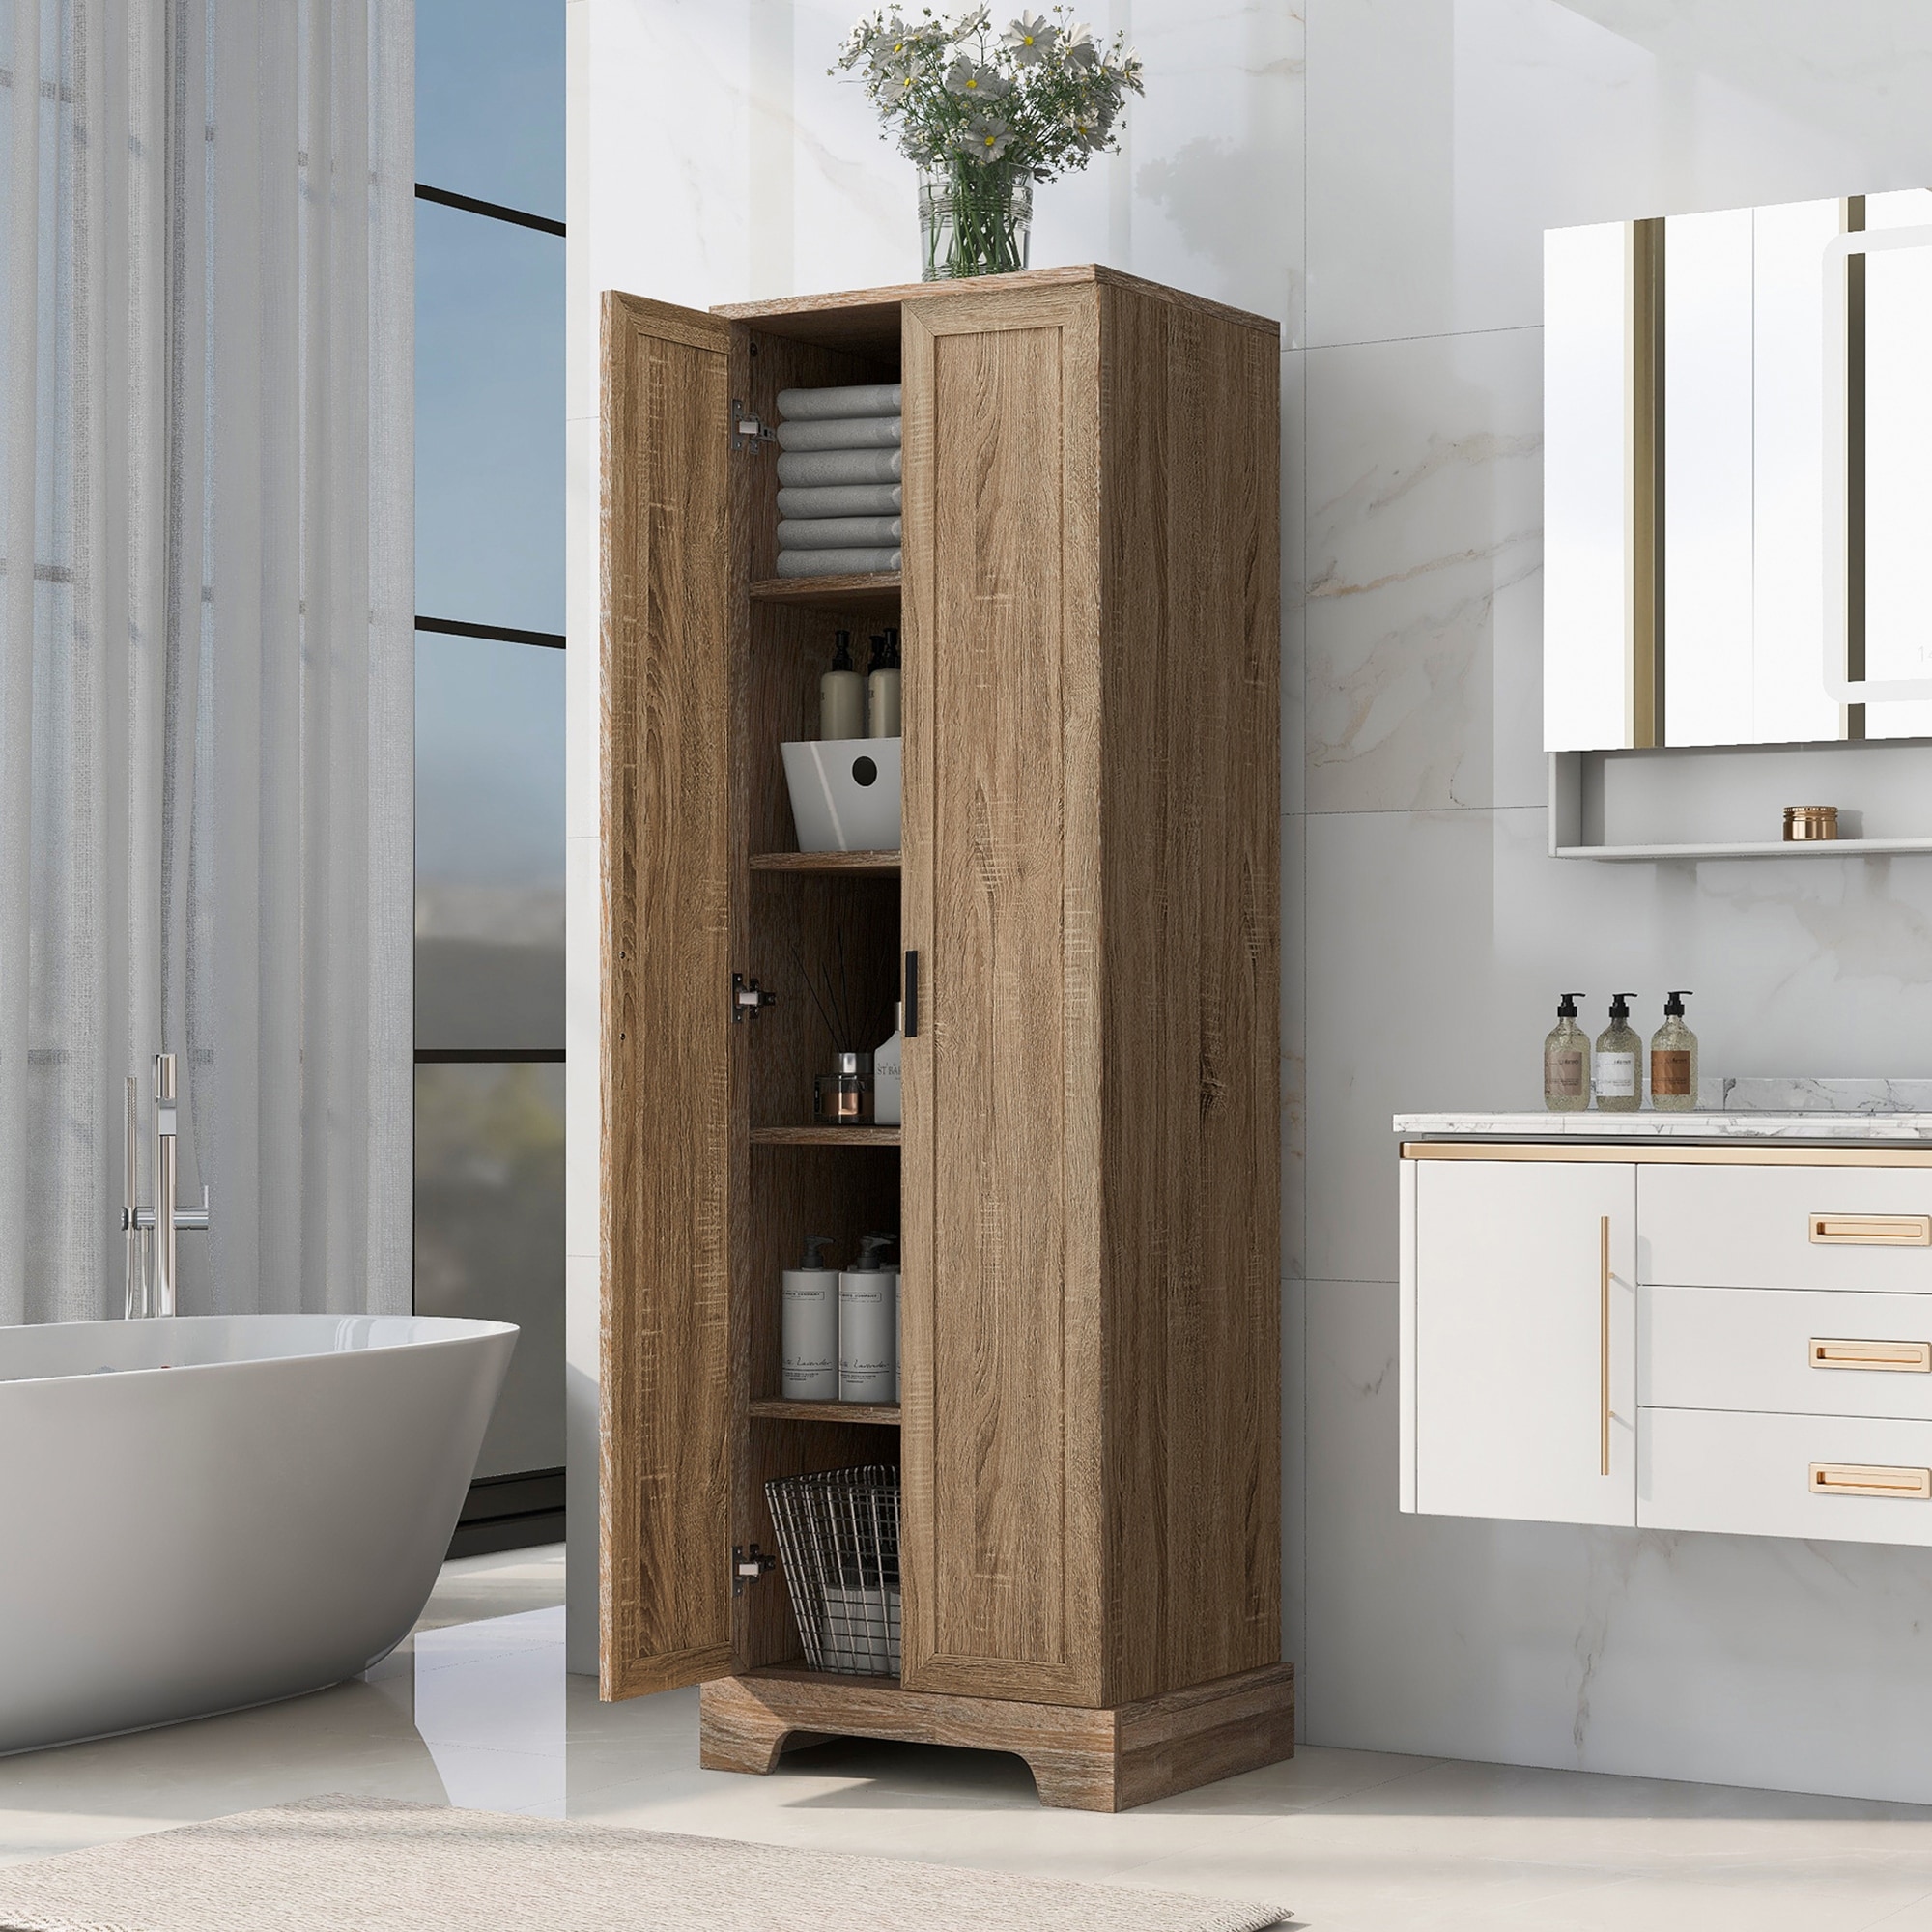 https://ak1.ostkcdn.com/images/products/is/images/direct/f908aae39a8c4a9b3c1f17d8ba21c0c1f760d1cf/Linen-Storage-Cabinet-Bookcase-Kitchen-Cutlery-Storage-Cabinet%2C-Brown.jpg